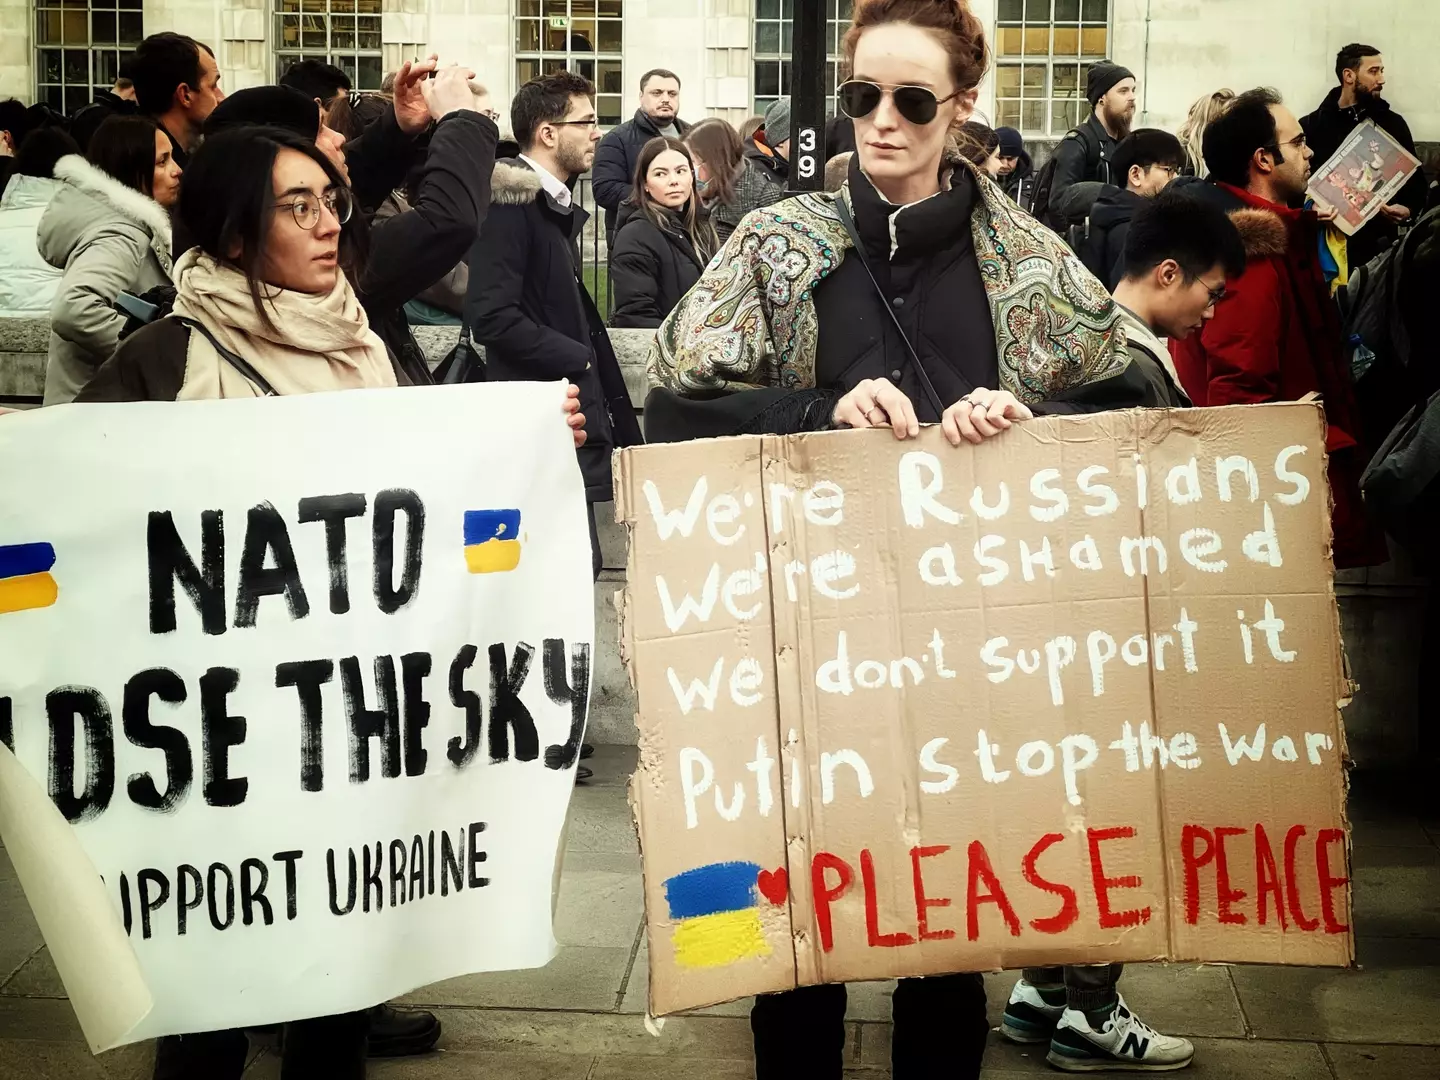 A protest against the Russian invasion of Ukraine /